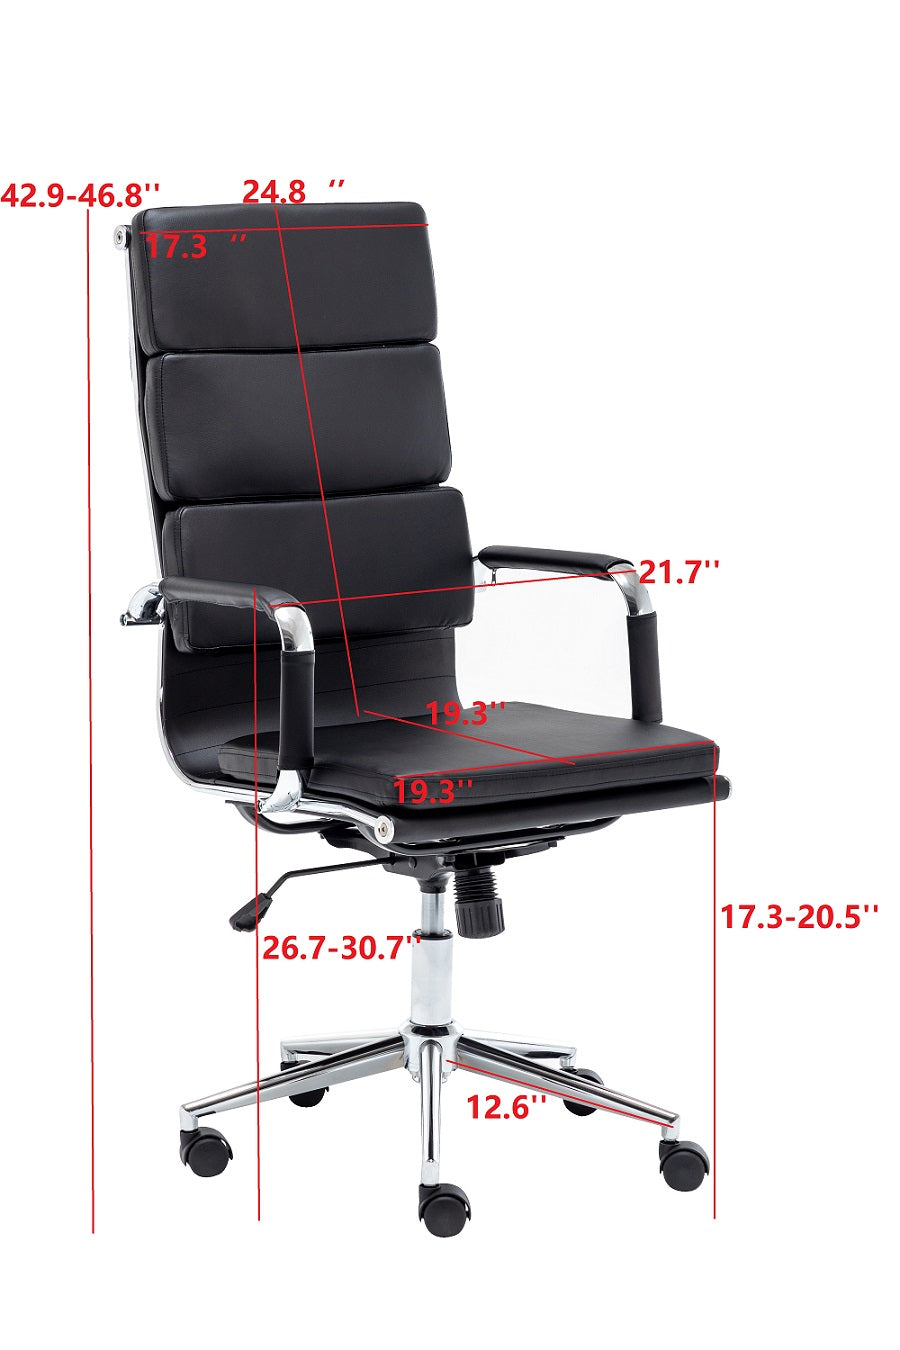 Executive Computer Desk Chair PU Executive Faux Leather Rolling Swivel 360 Rotation Task Residential Commercial for Office, Home